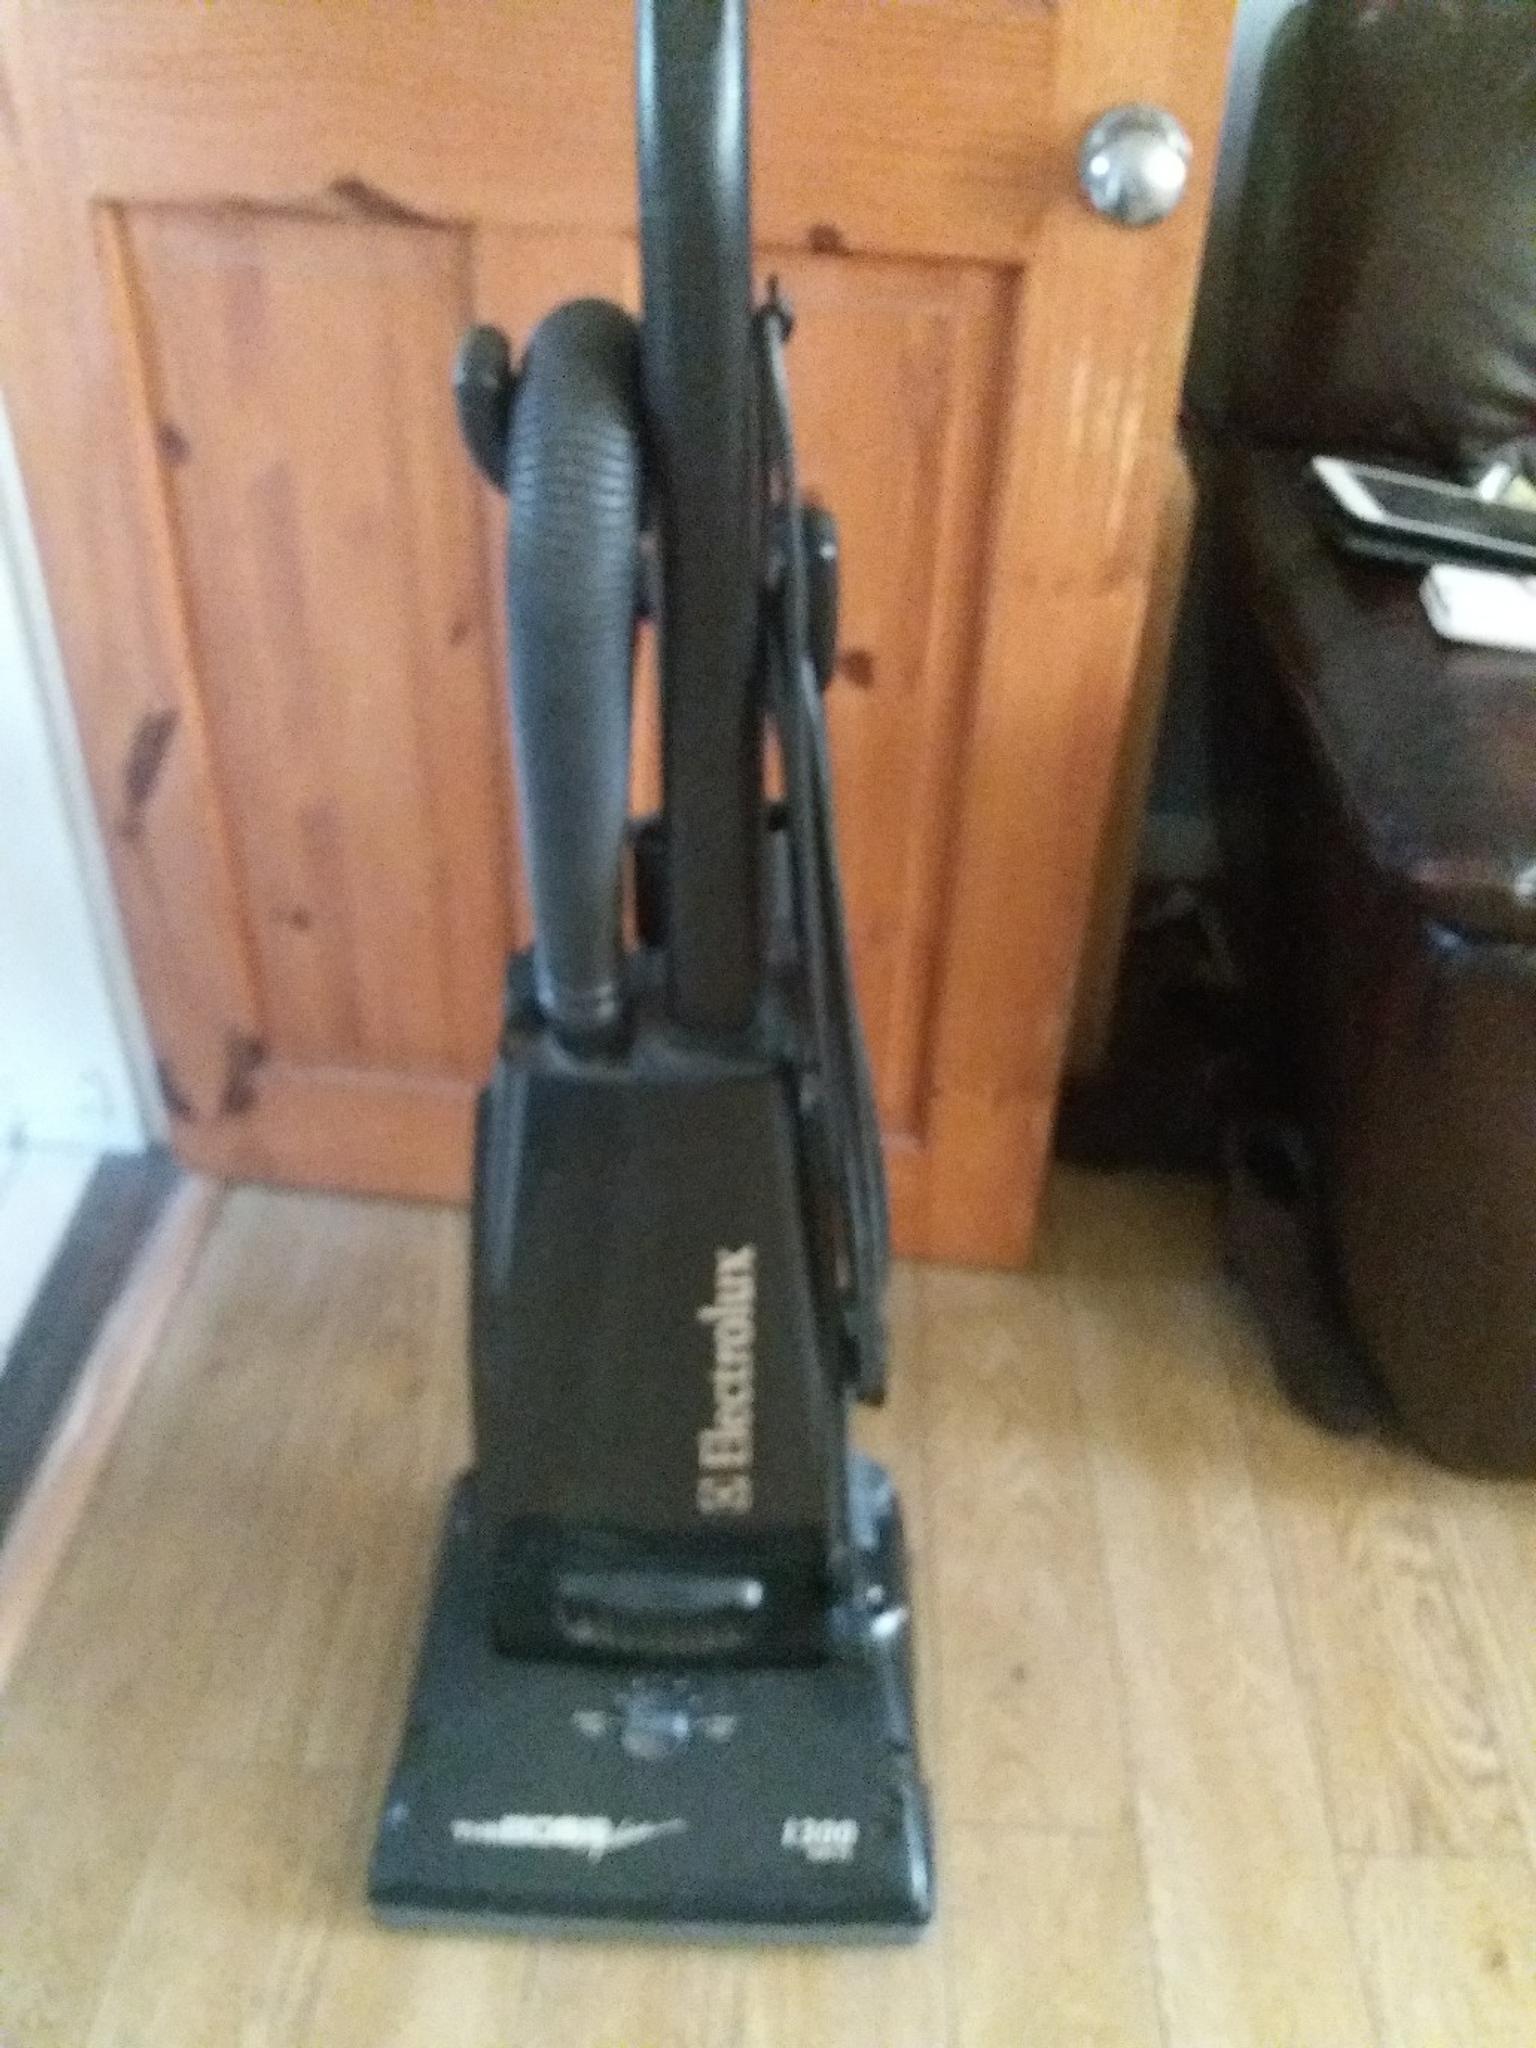 electrolux the boss hoover